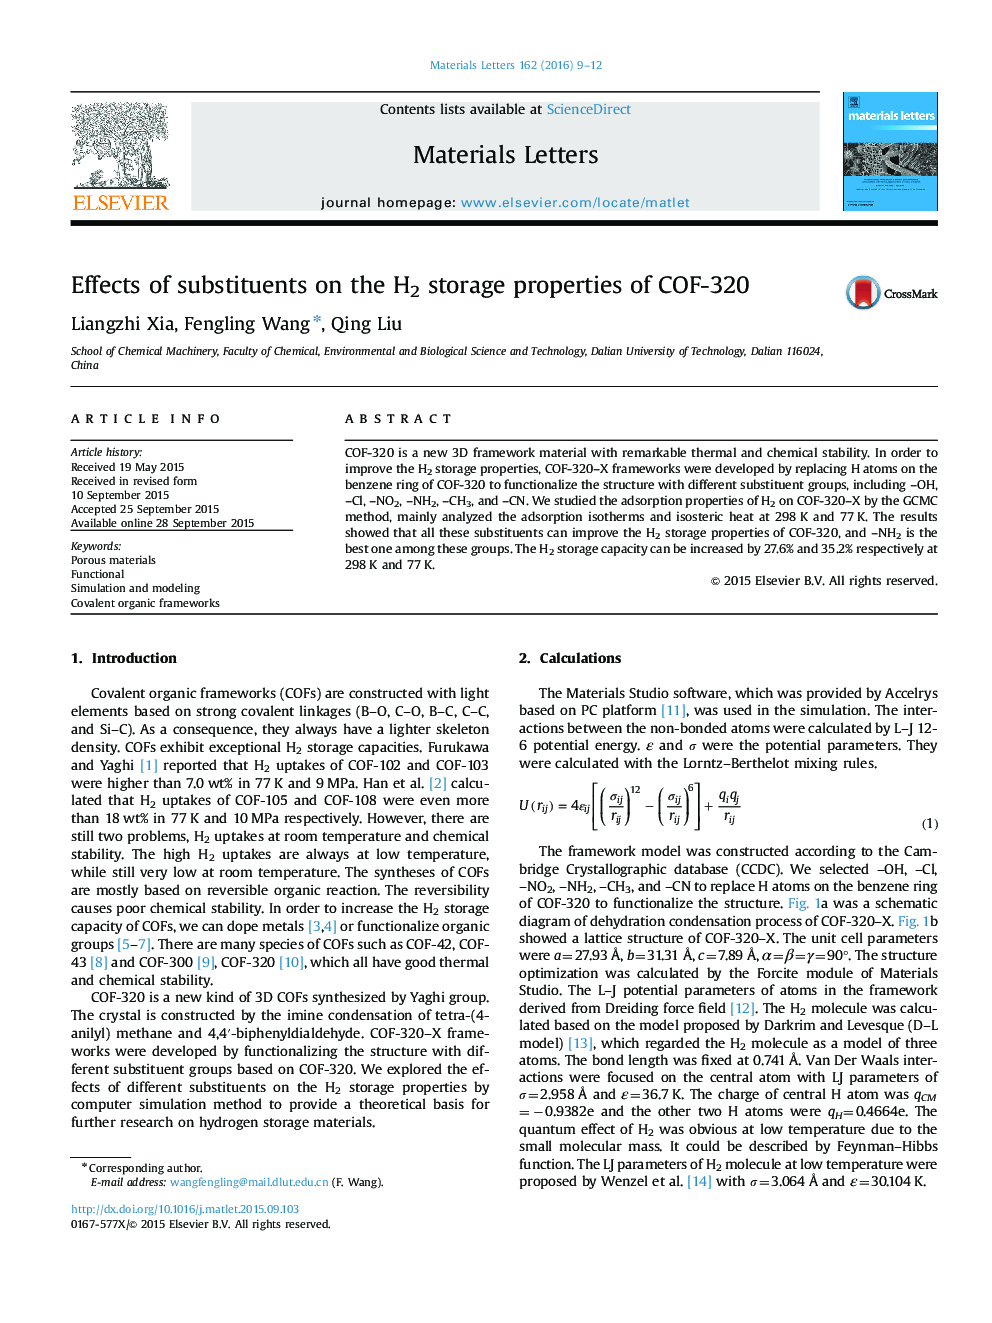 Effects of substituents on the H2 storage properties of COF-320